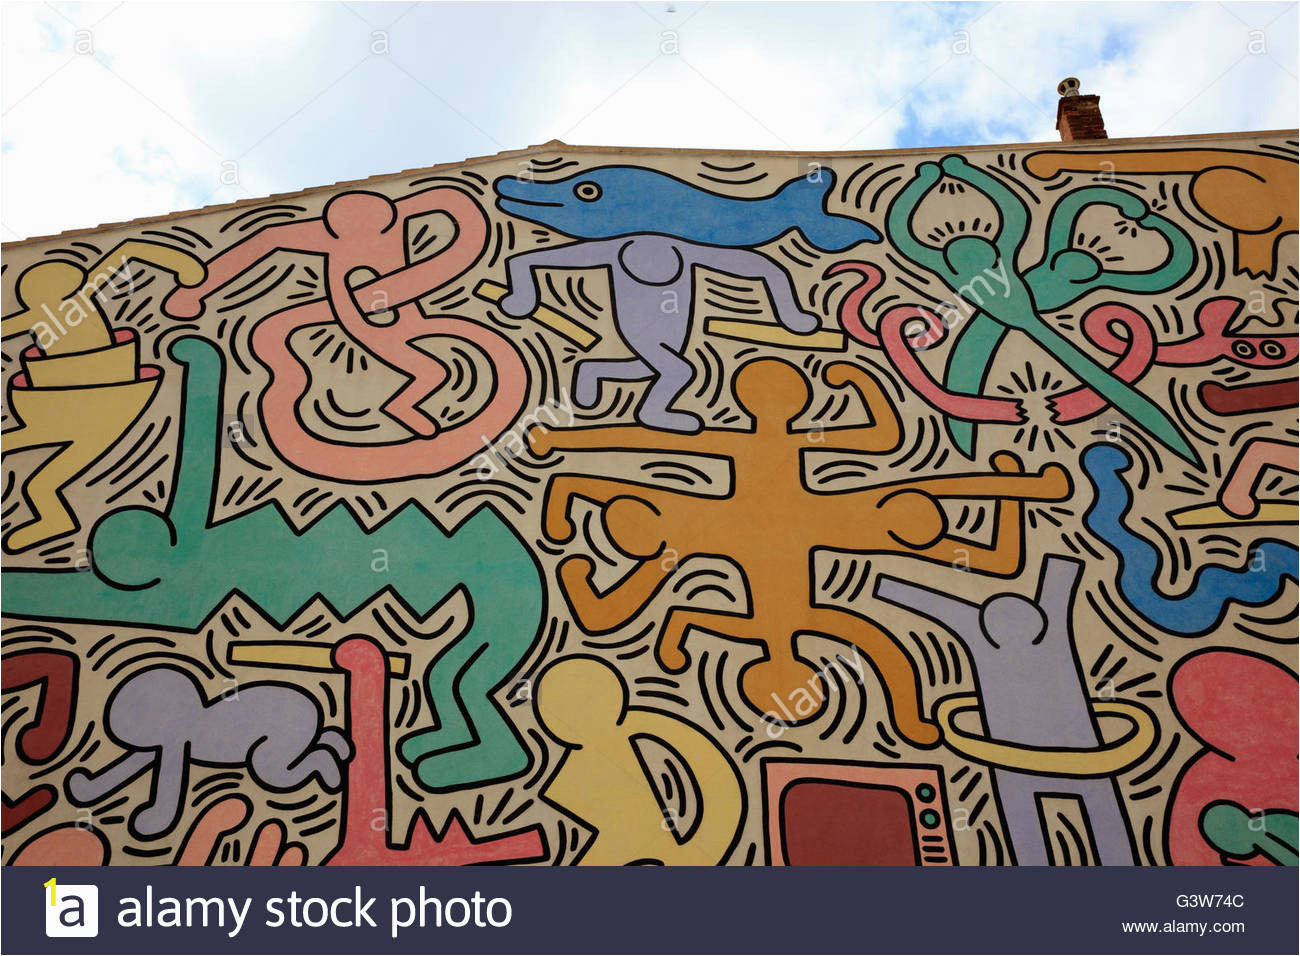 the pisas mural 1989 keith haring painted on the south wall of the G3W74C